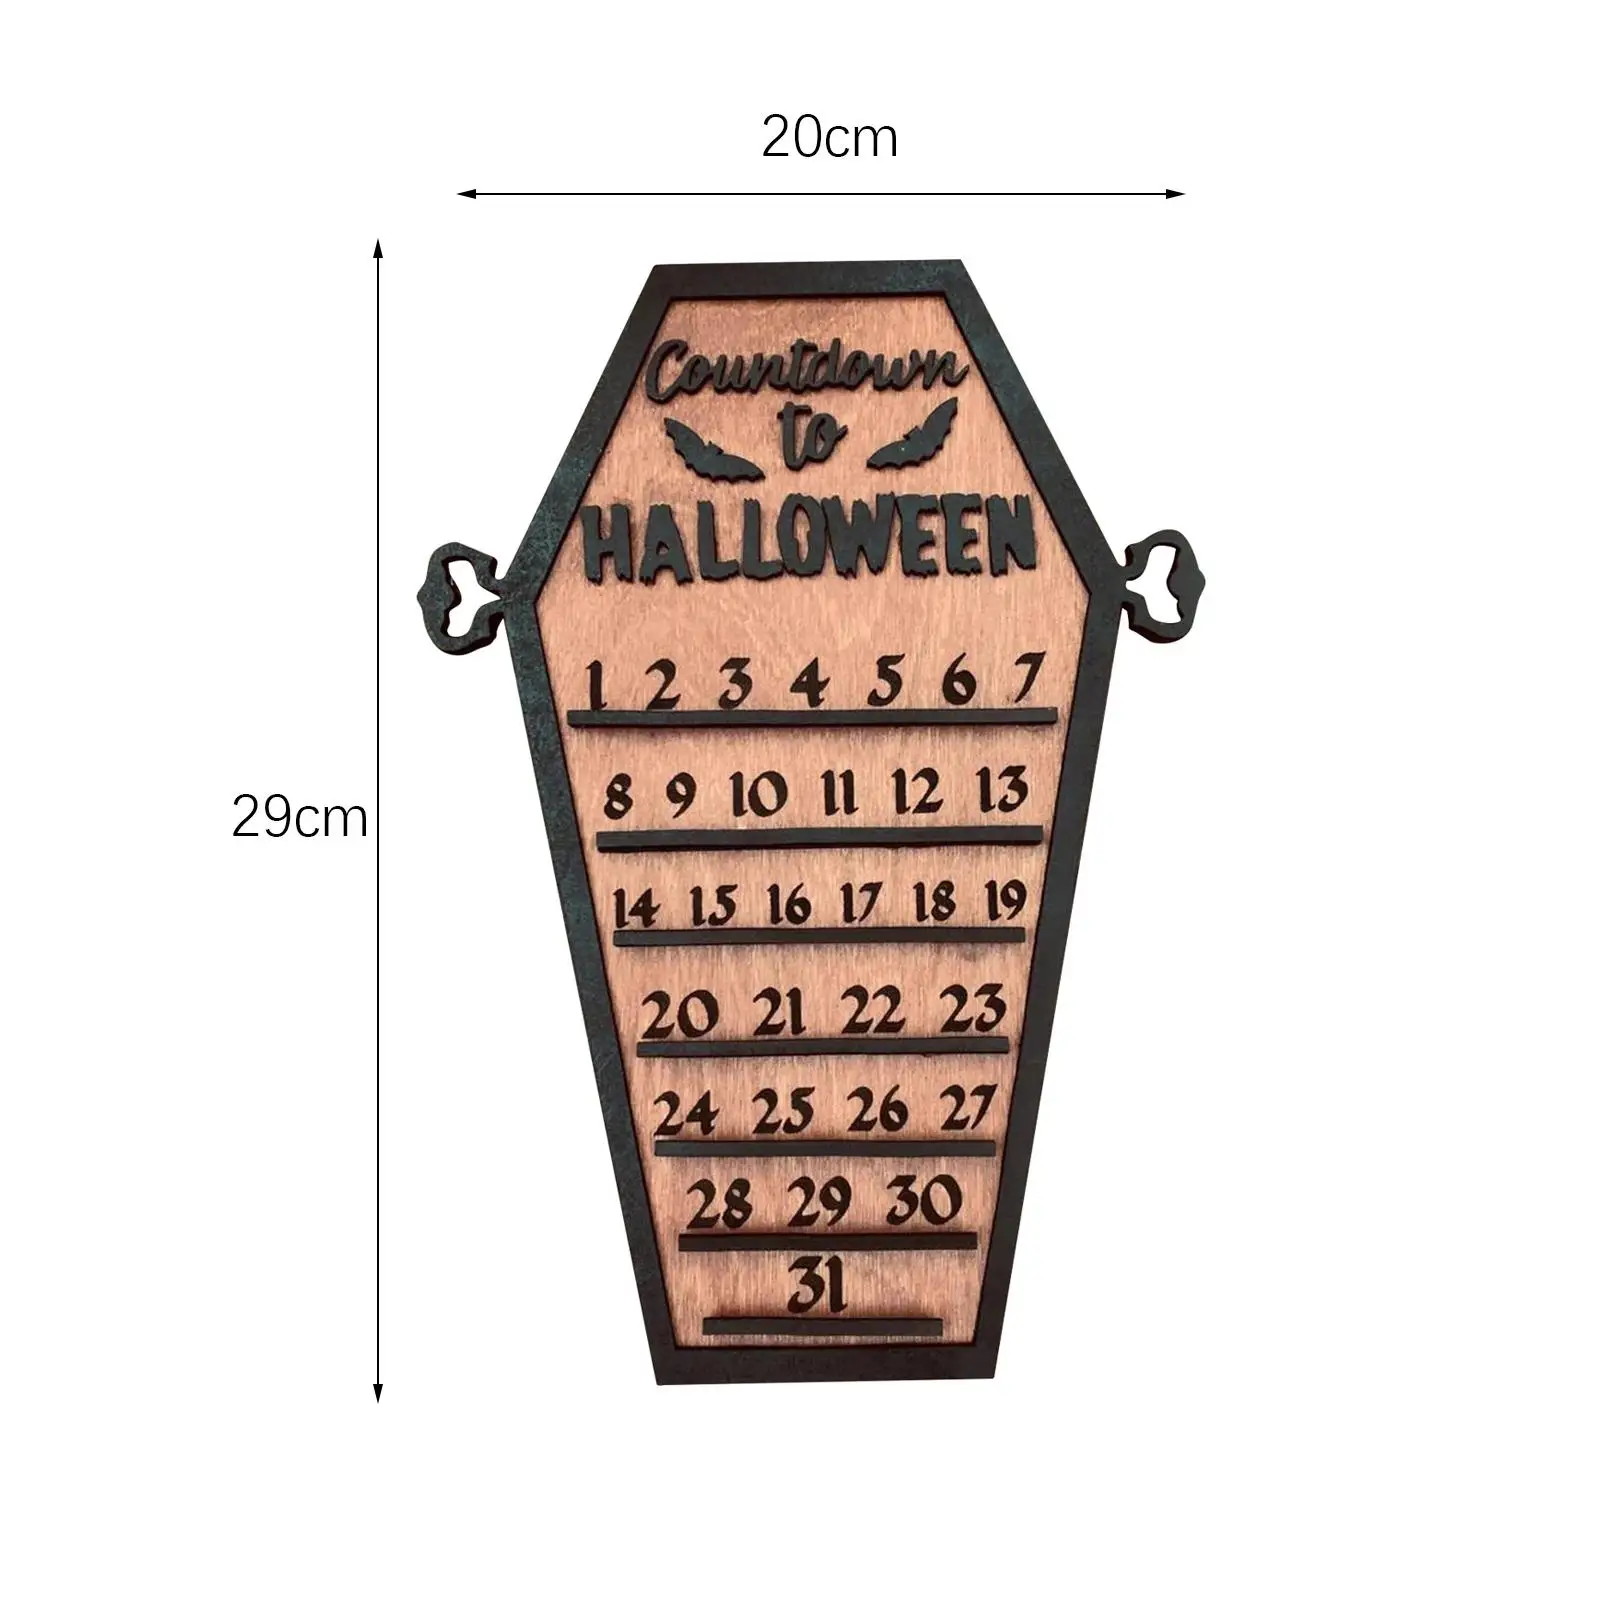 Halloween Countdown Advent Calendar Halloween Advent Calendar for Desk Party Favors Haunted House Birthday Gifts Decorations